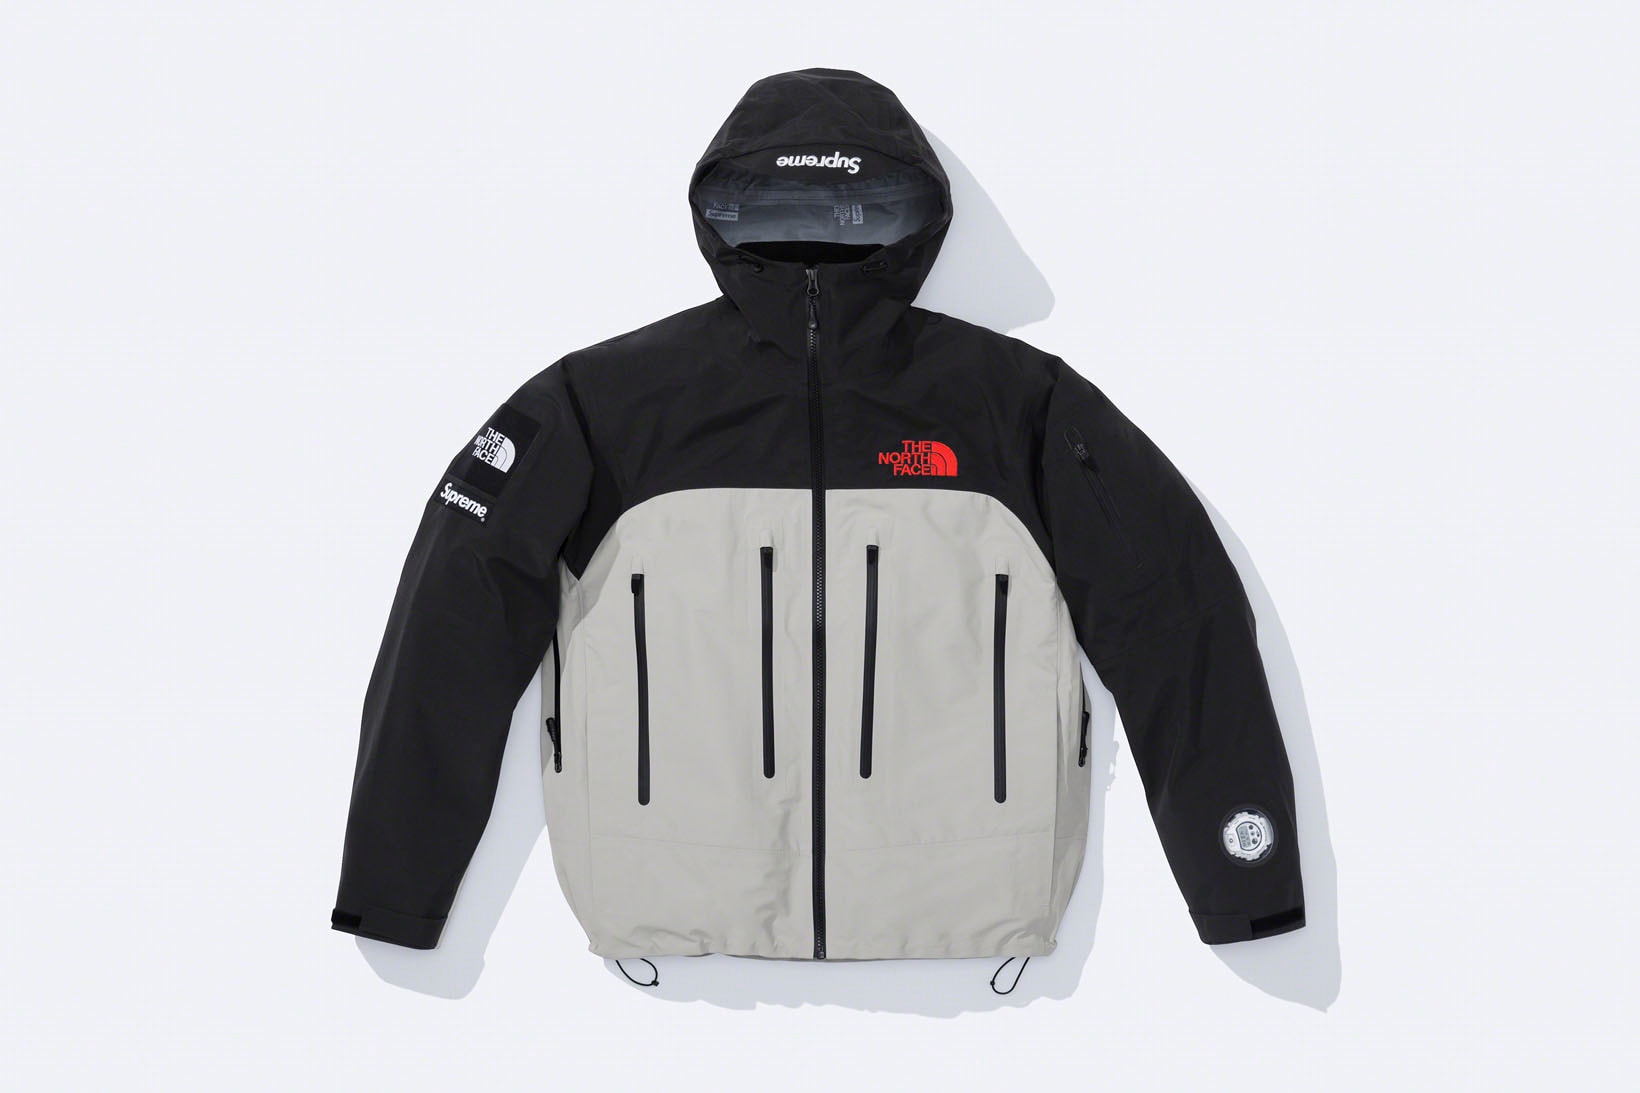 The North Face Supreme Fall Collaboration Outerwear Puffer Jacket G-SHOCK Watches Release Date Info